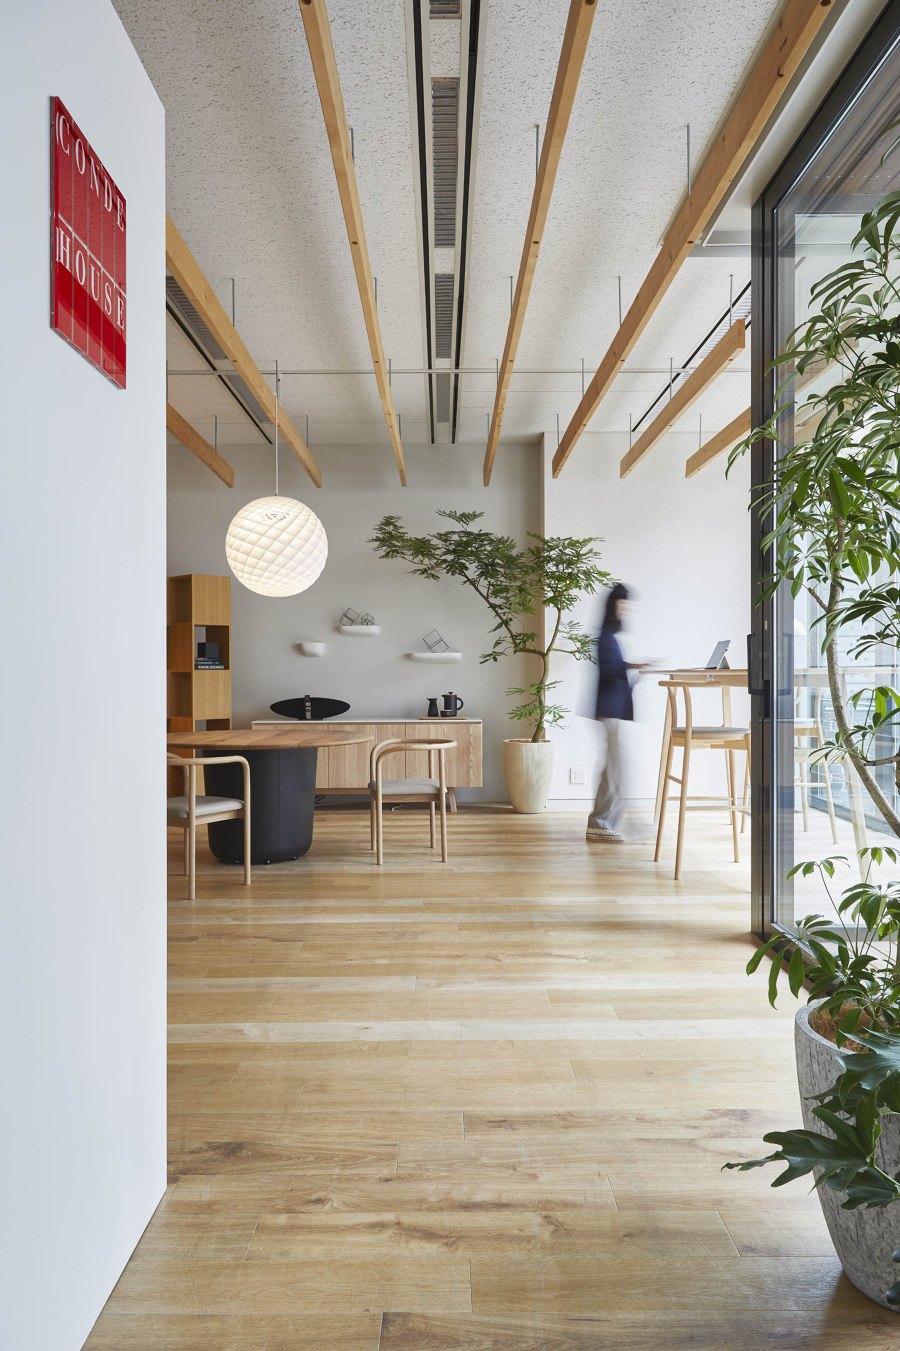 Ch-ch-changes: Conde House's new Open Office space | News